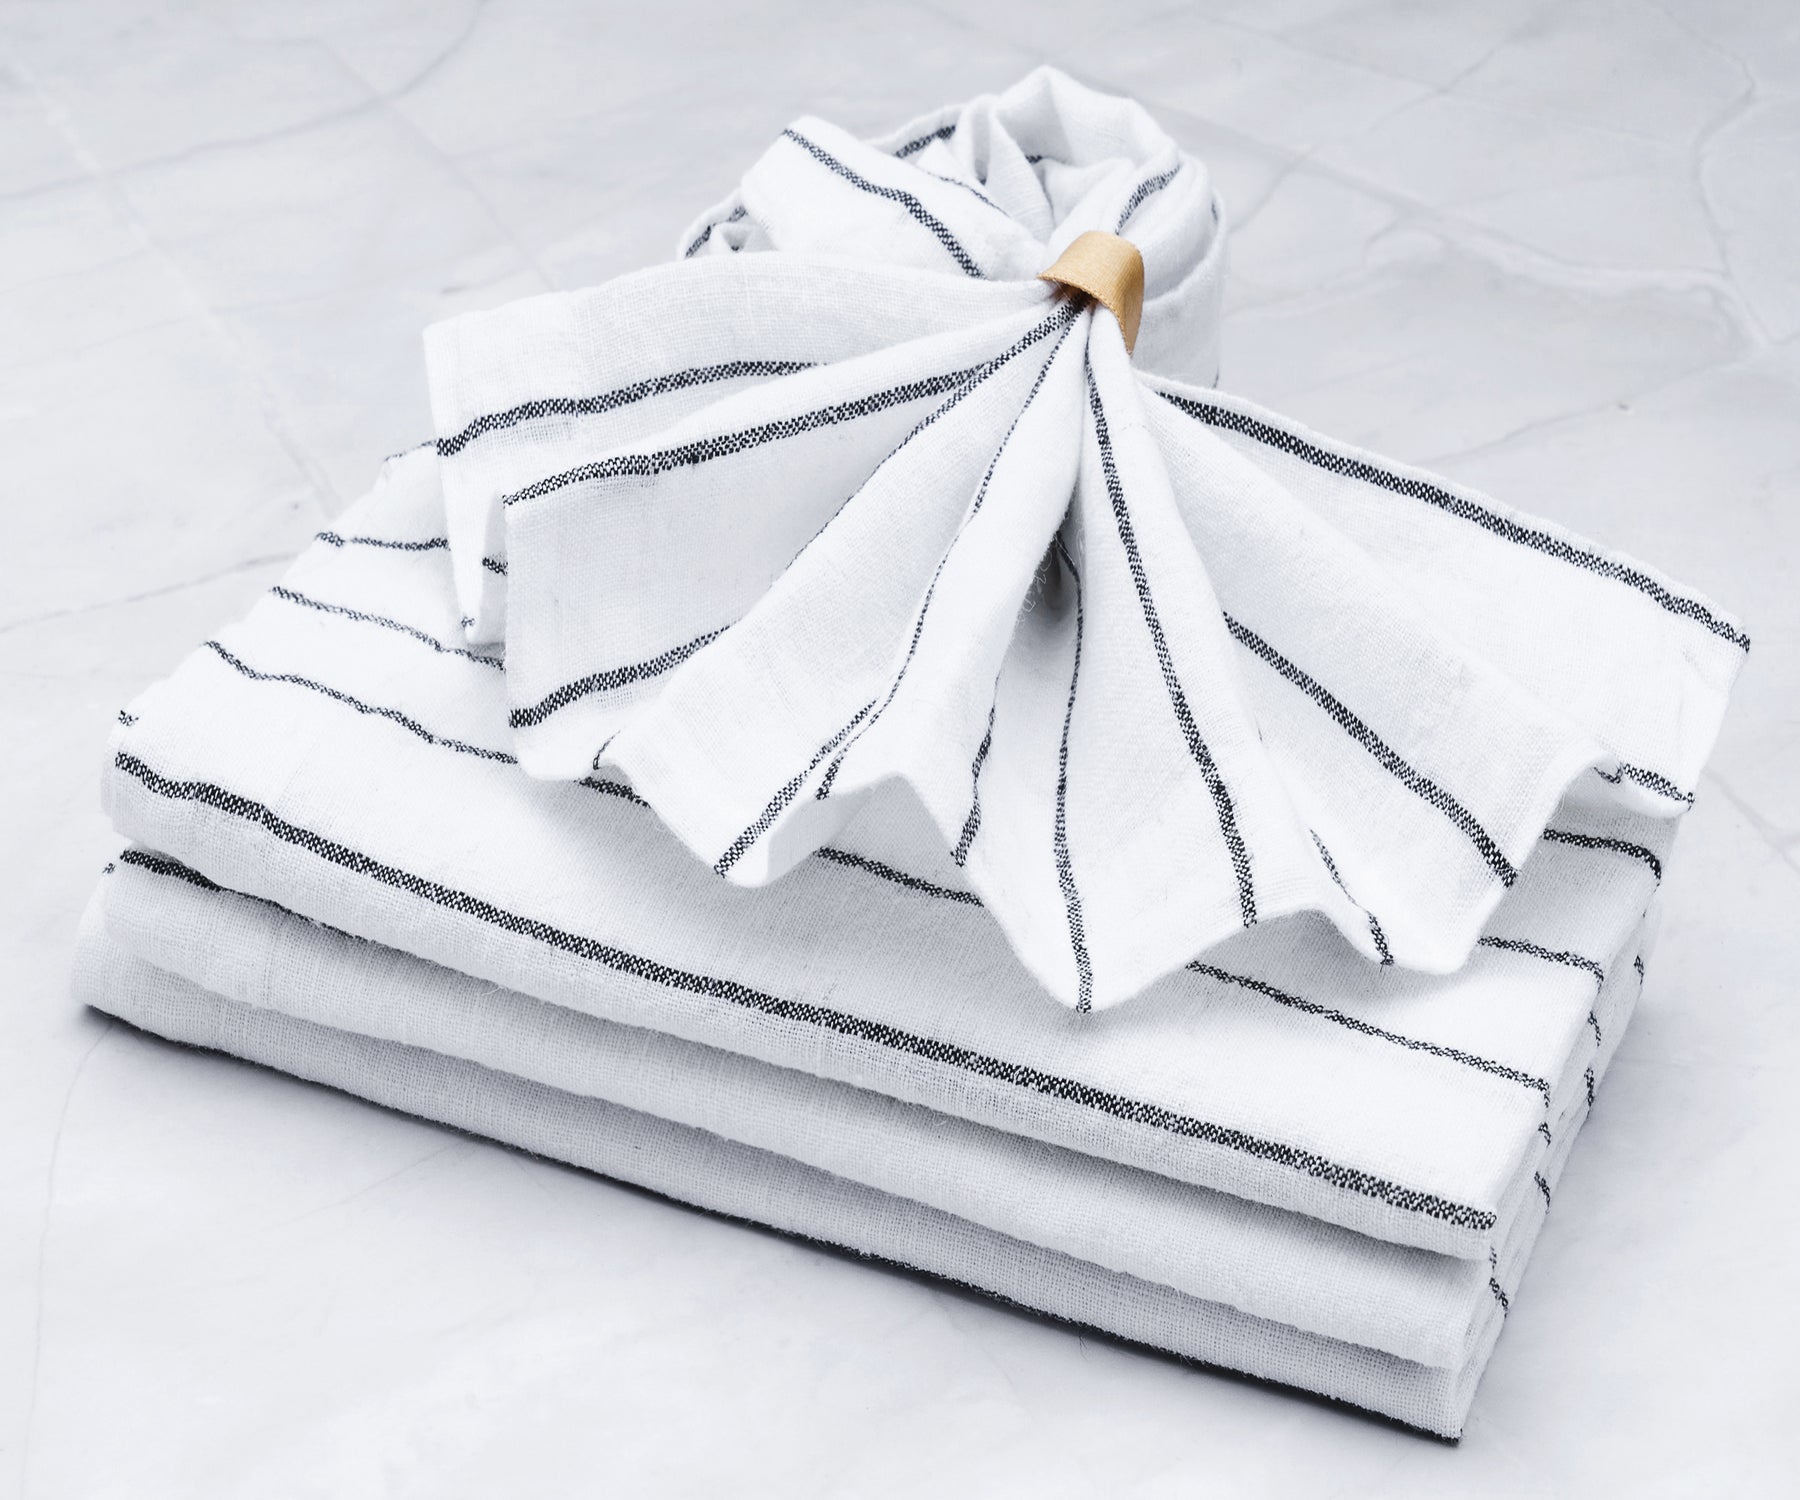 Bulk pack of cloth dinner napkins, ensuring an ample supply for large gatherings.